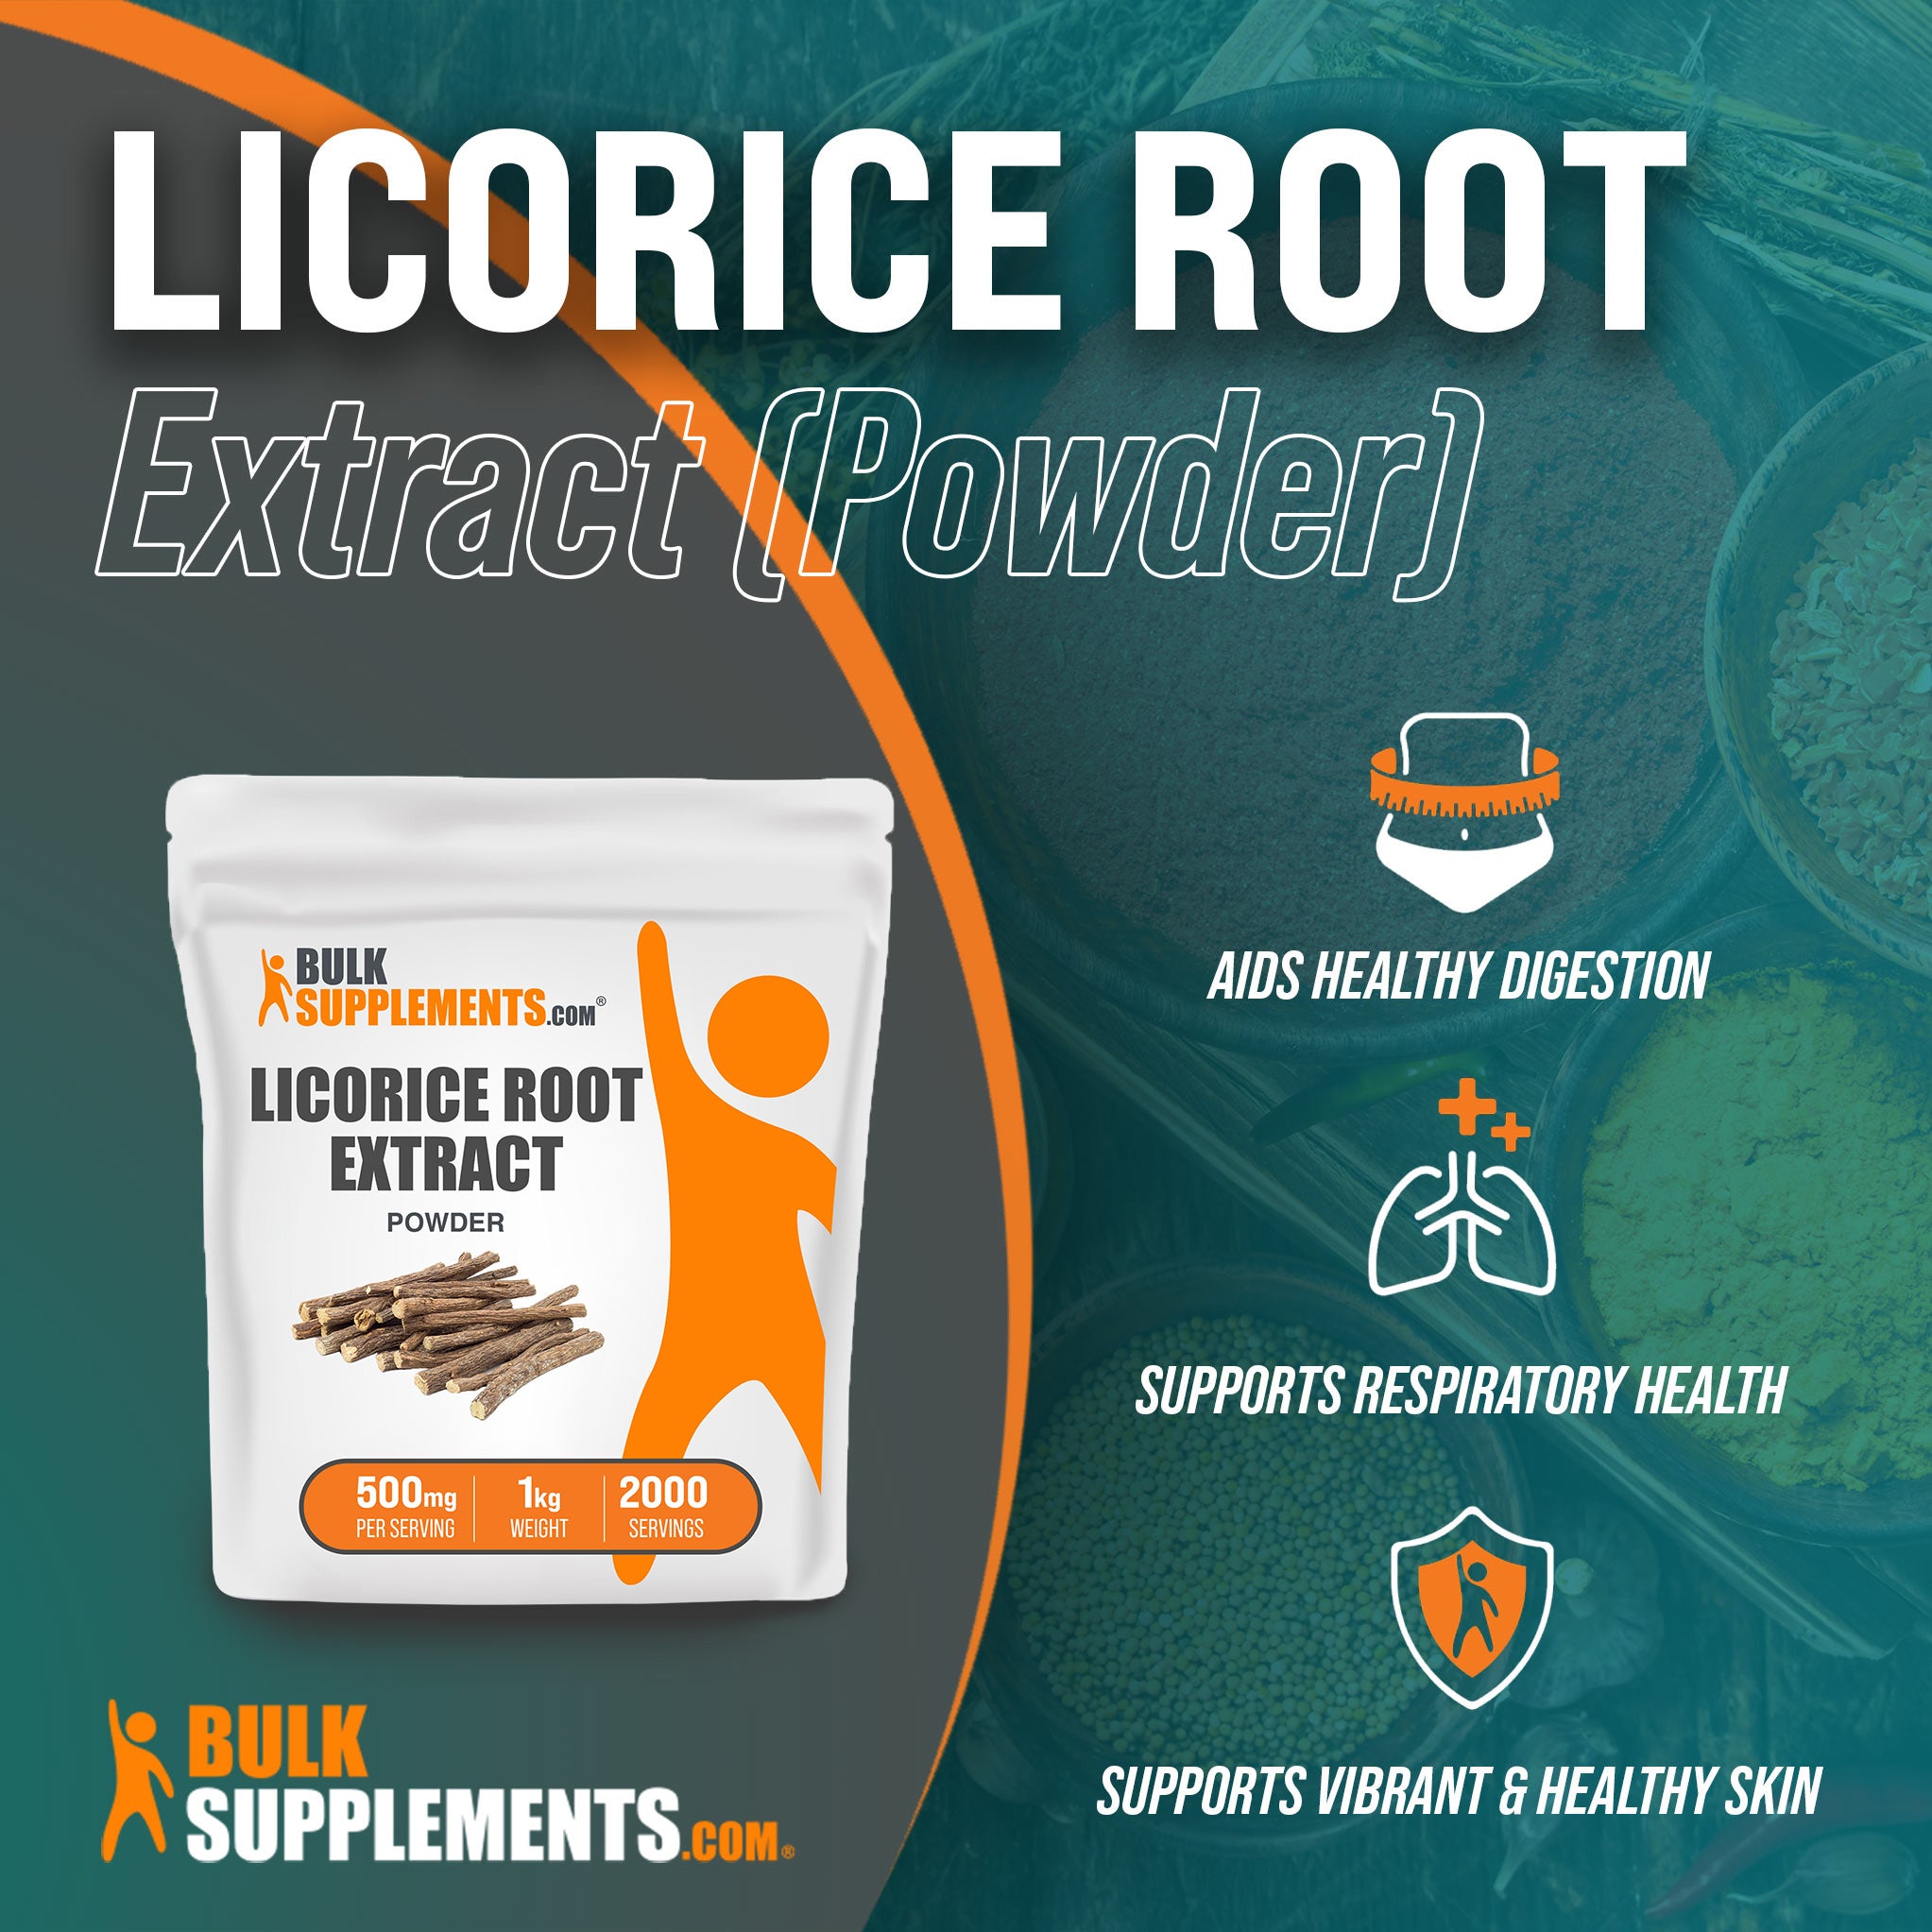 Benefits of Licorice Root Extract: aids healthy digestion, supports respiratory health, supports vibrant and healthy skin